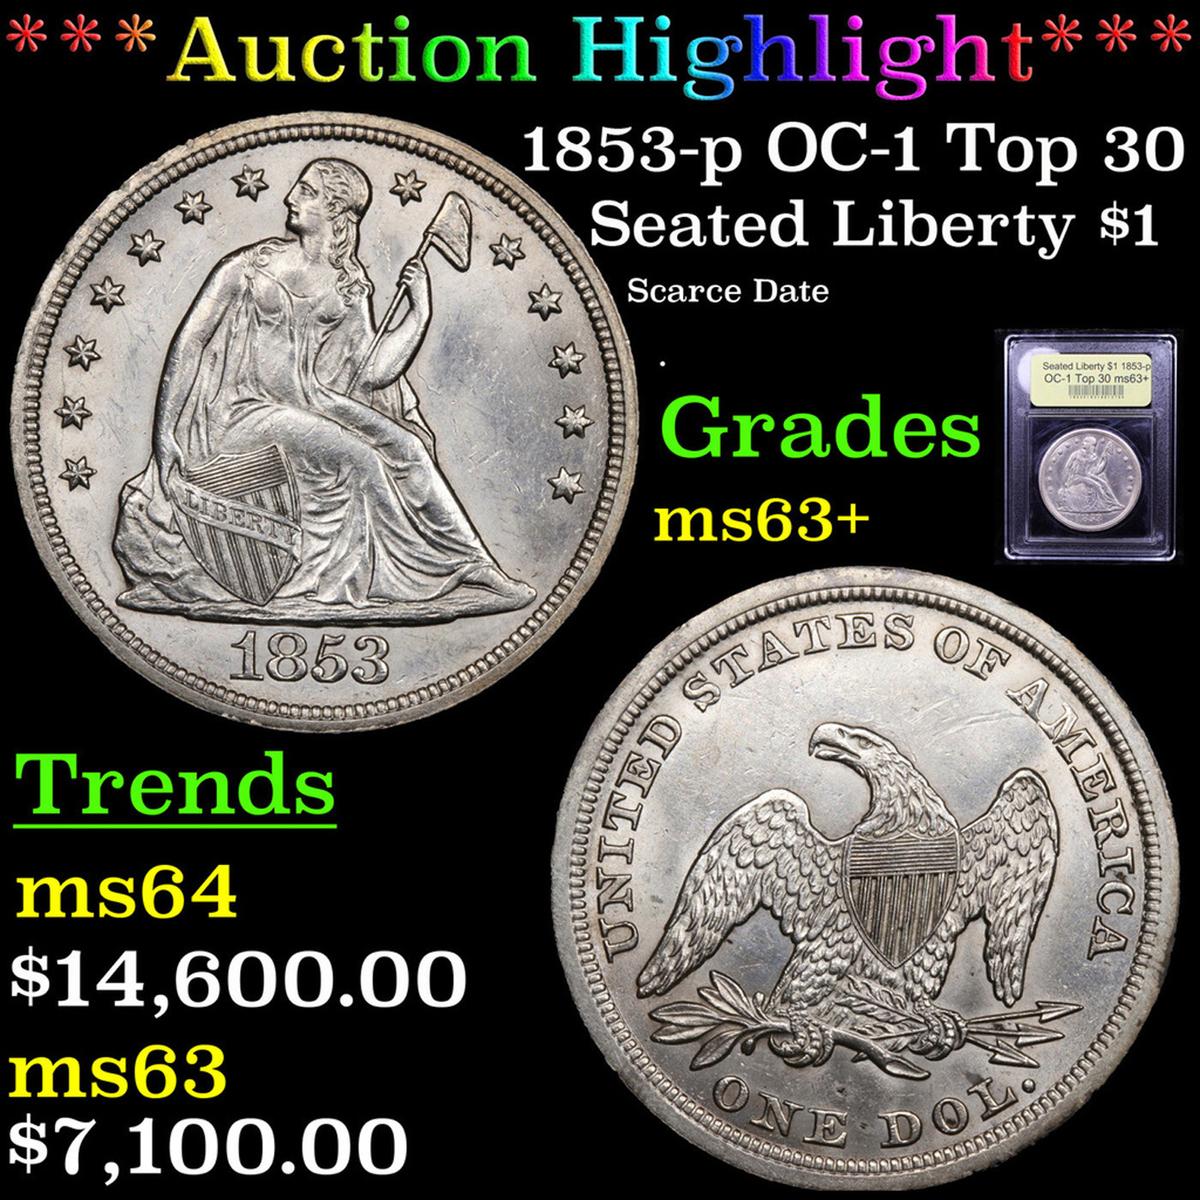 ***Auction Highlight*** 1853-p OC-1 Top 30 Seated Liberty Dollar 1 Graded Select+ Unc By USCG (fc)